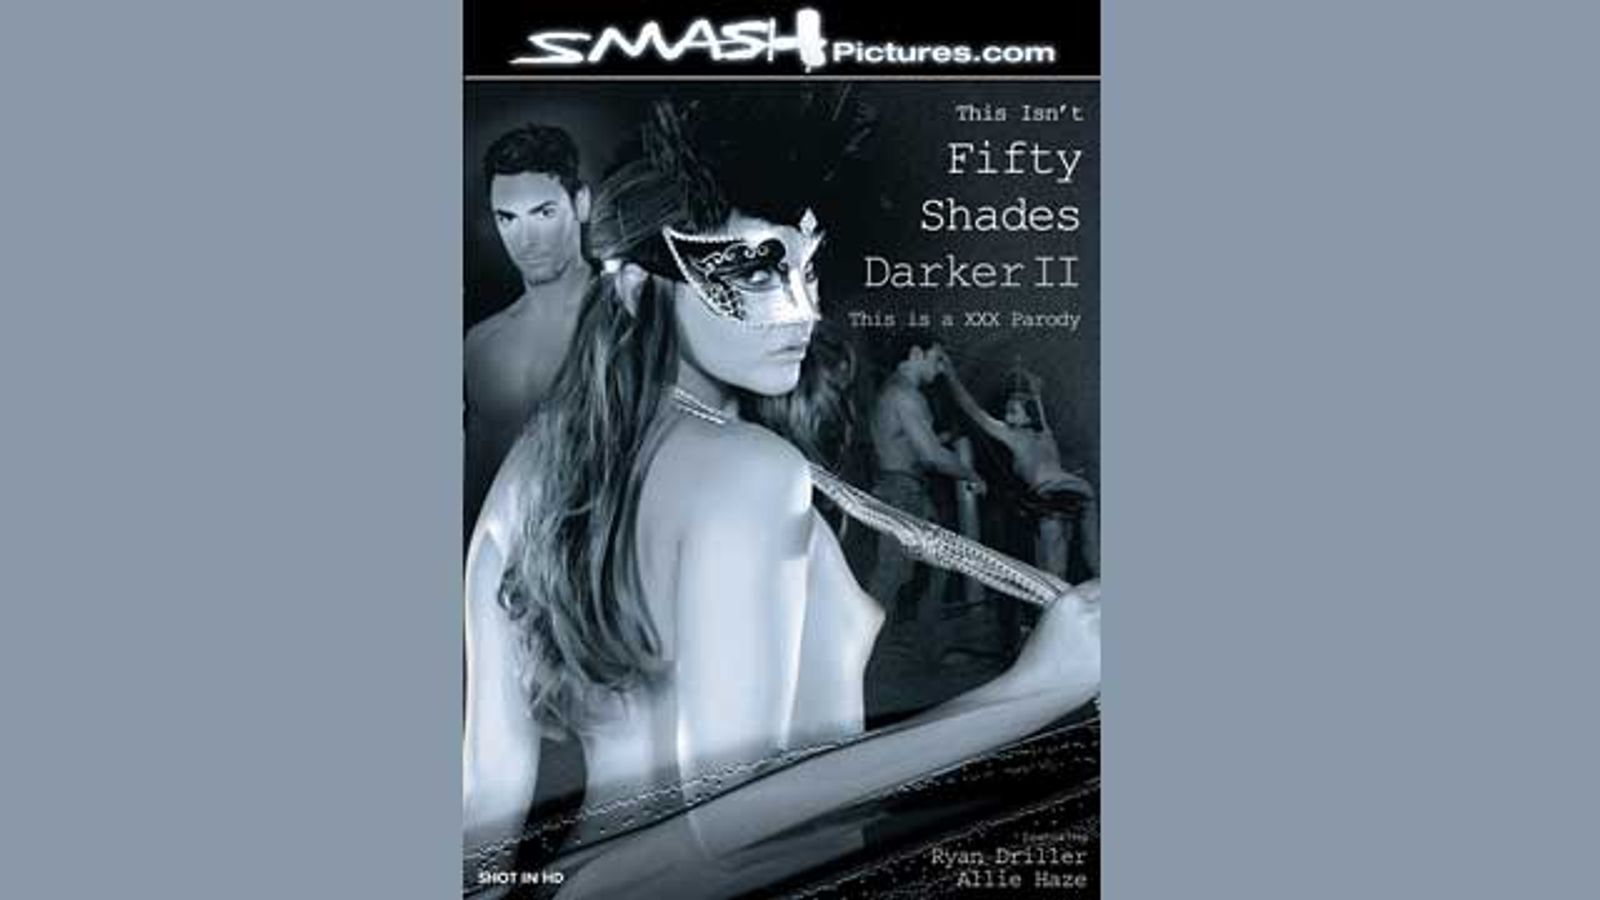 'Fifty Shades Darker II' Parody Street Date Set by Smash Pictures